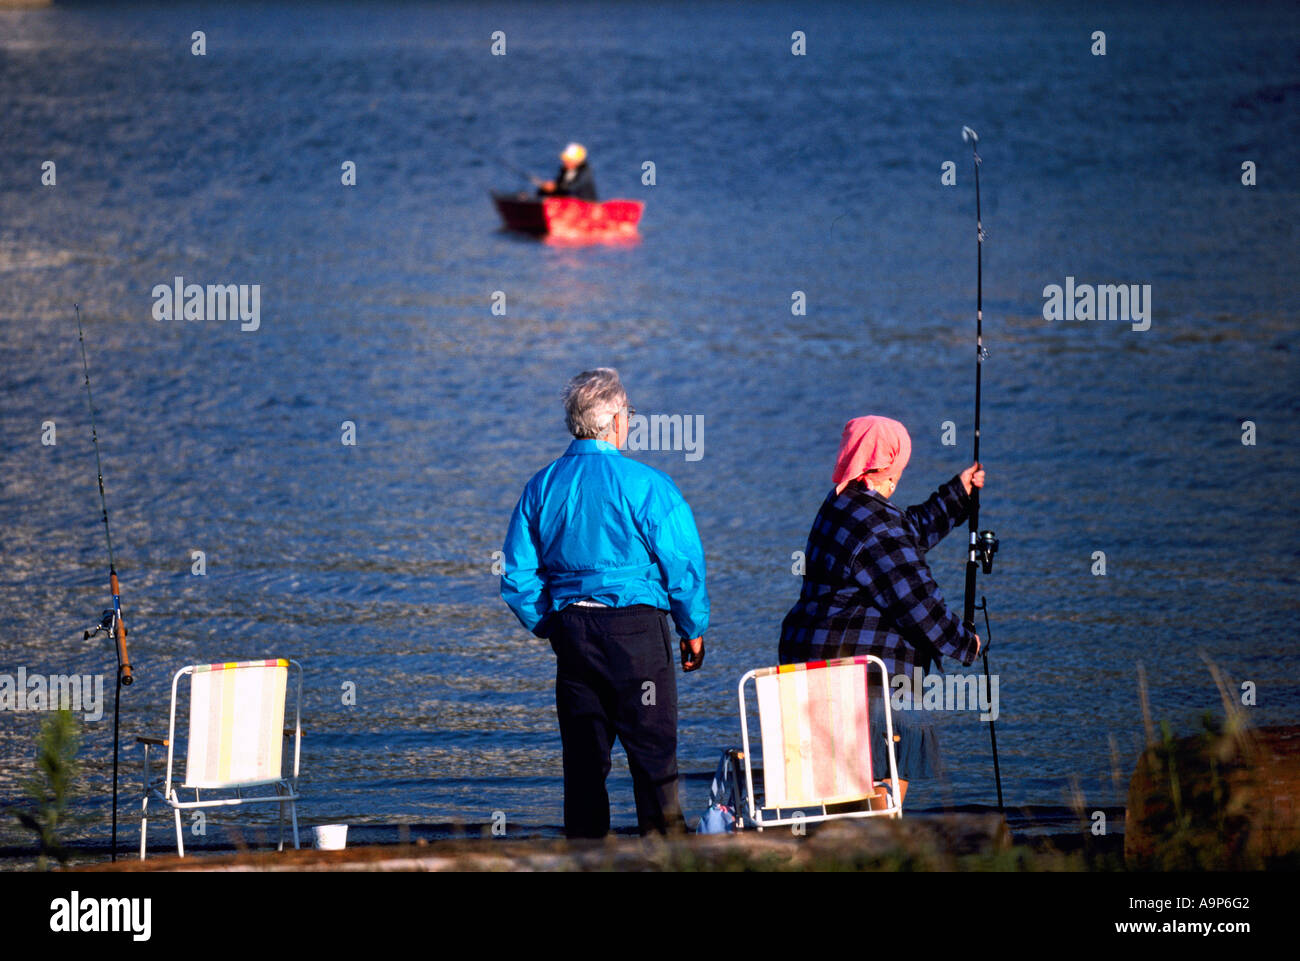 Couple fishing from Shore in Fraser River, New Westminster, BC, British Columbia, Canada - Fisherman fishes from Rowboat Stock Photo